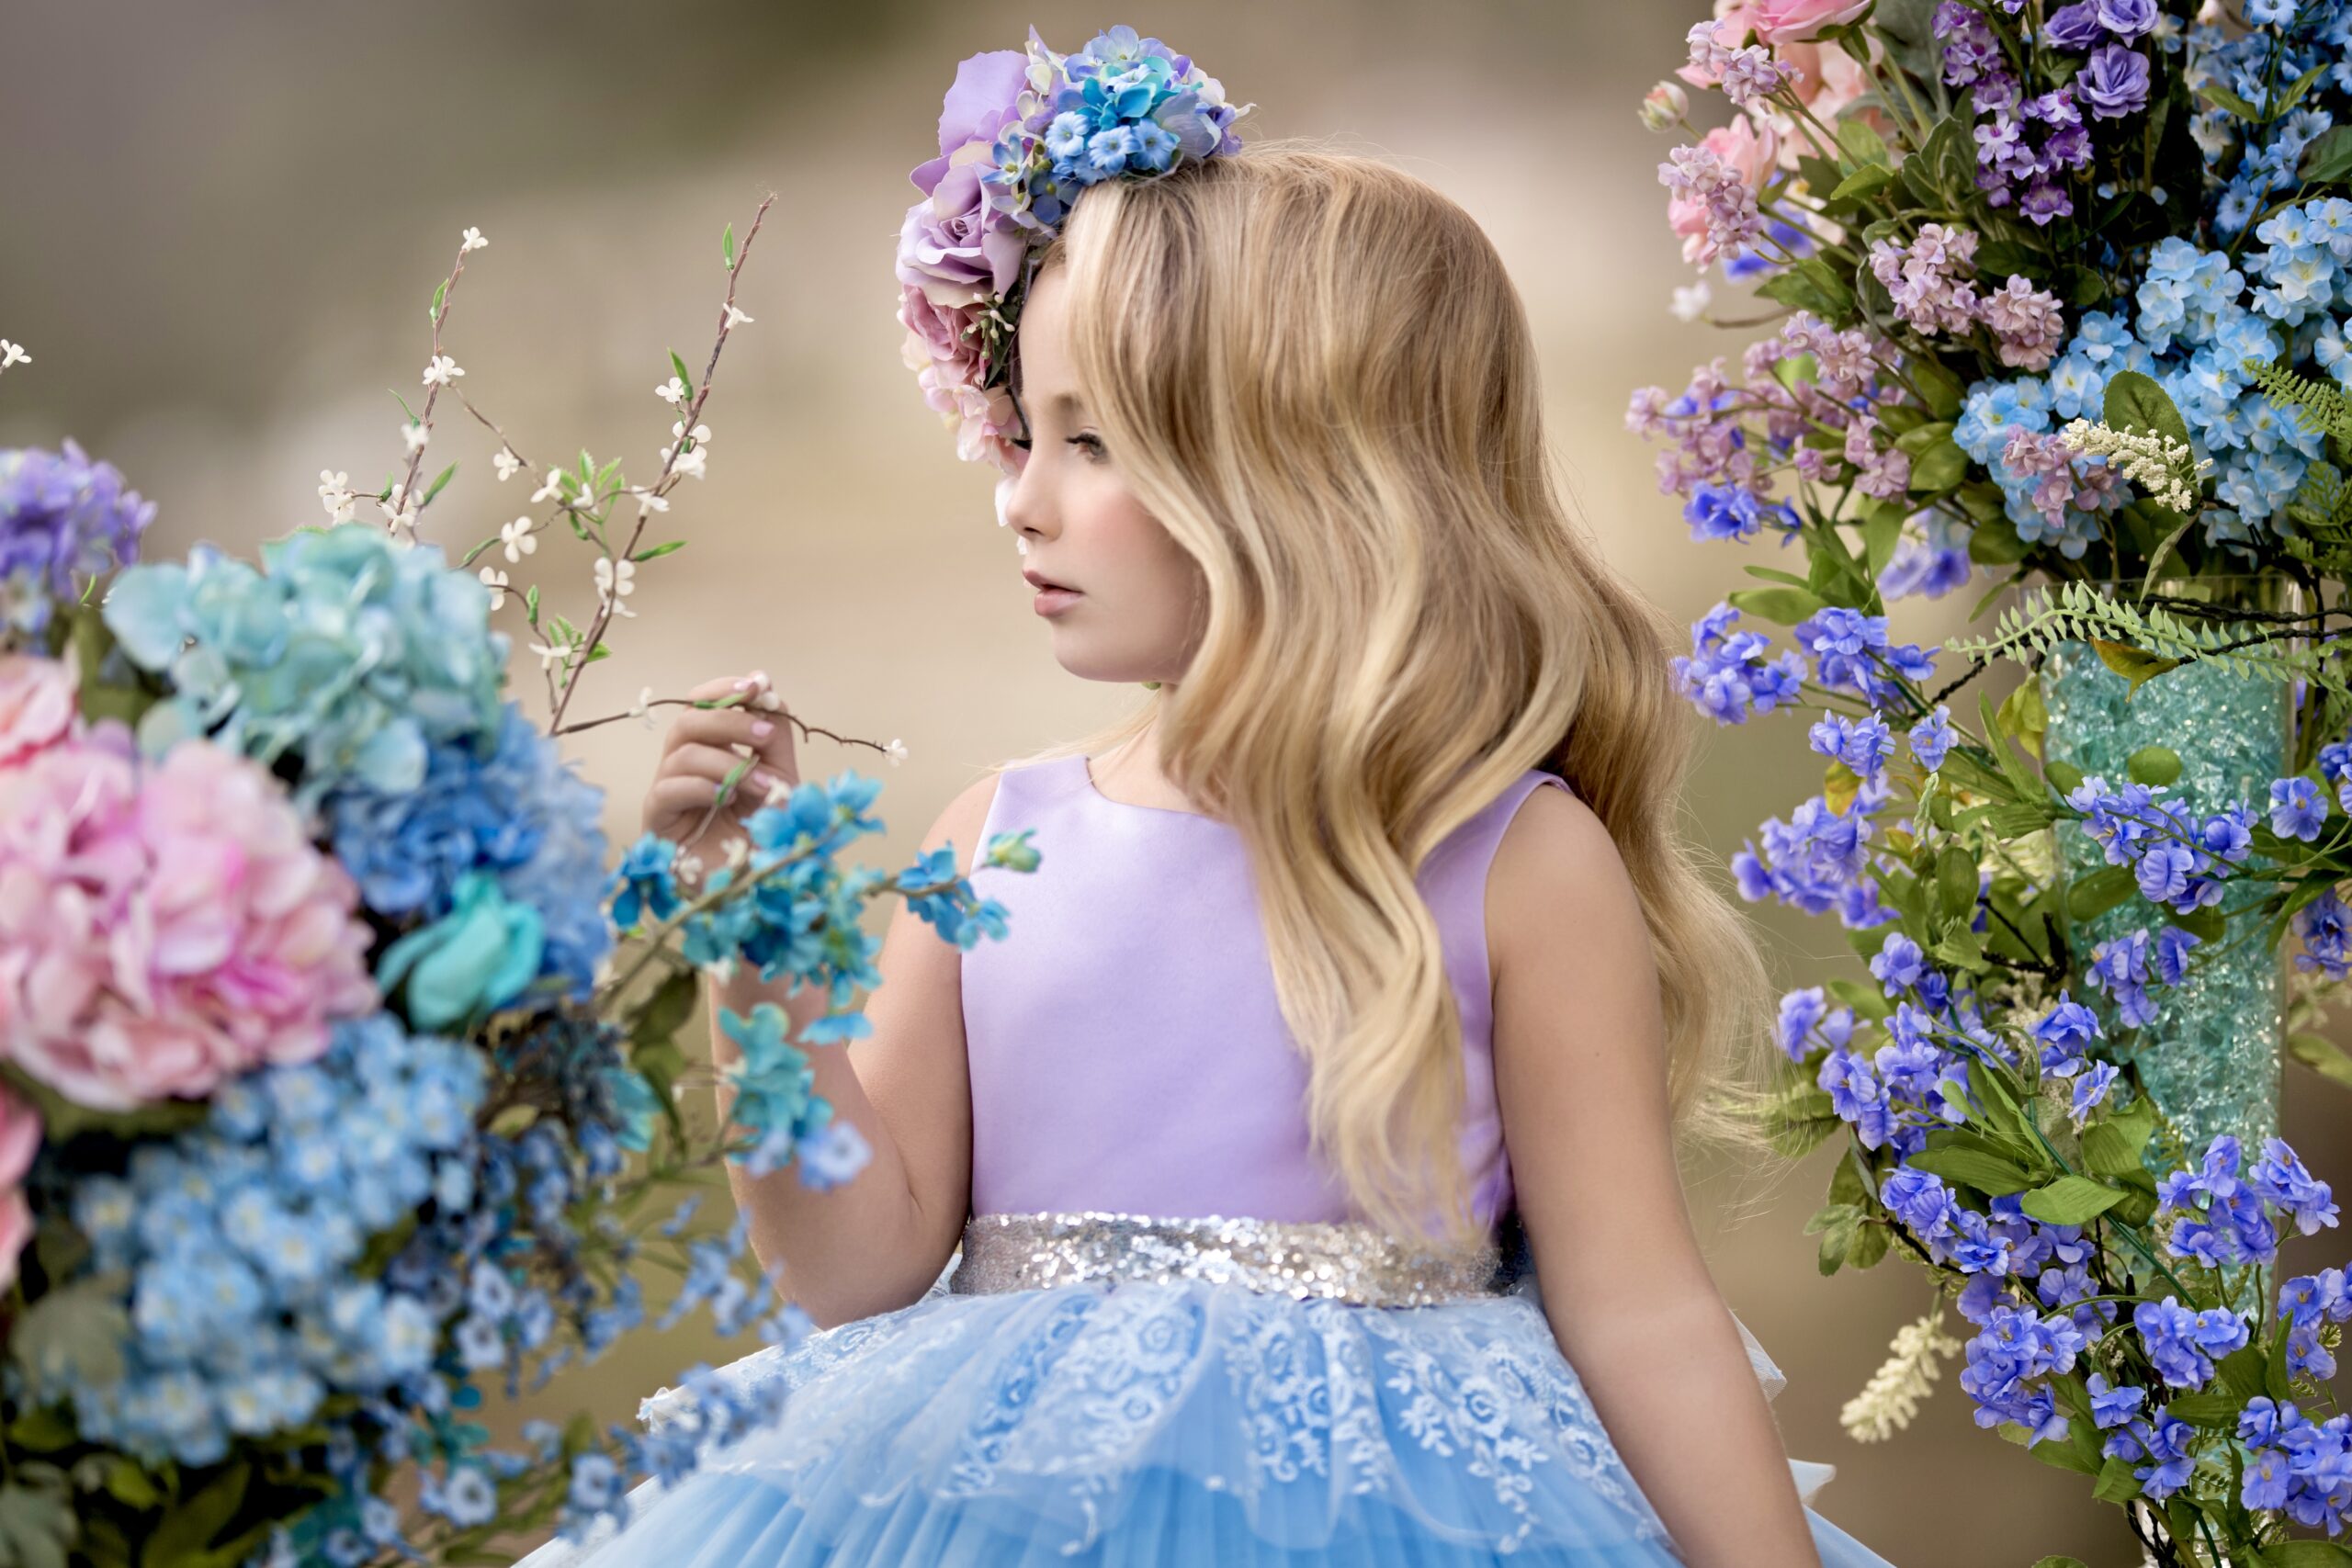 Girl in purple and light blue dress looking at purple and blue flowers with a purple and blue floral headpiece on her head.